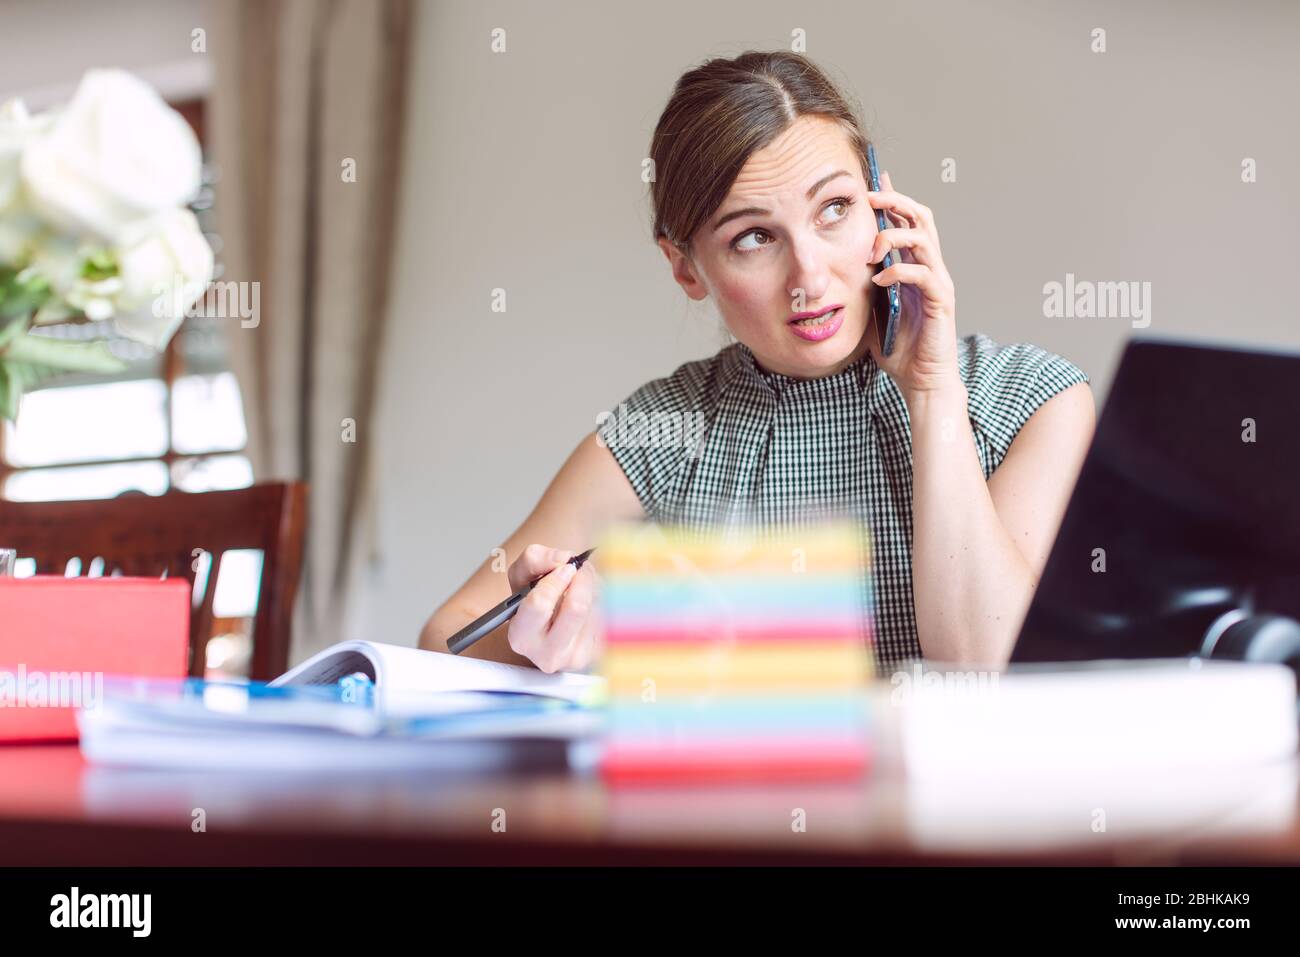 Businesswoman cannot tolerate working from home any longer Stock Photo